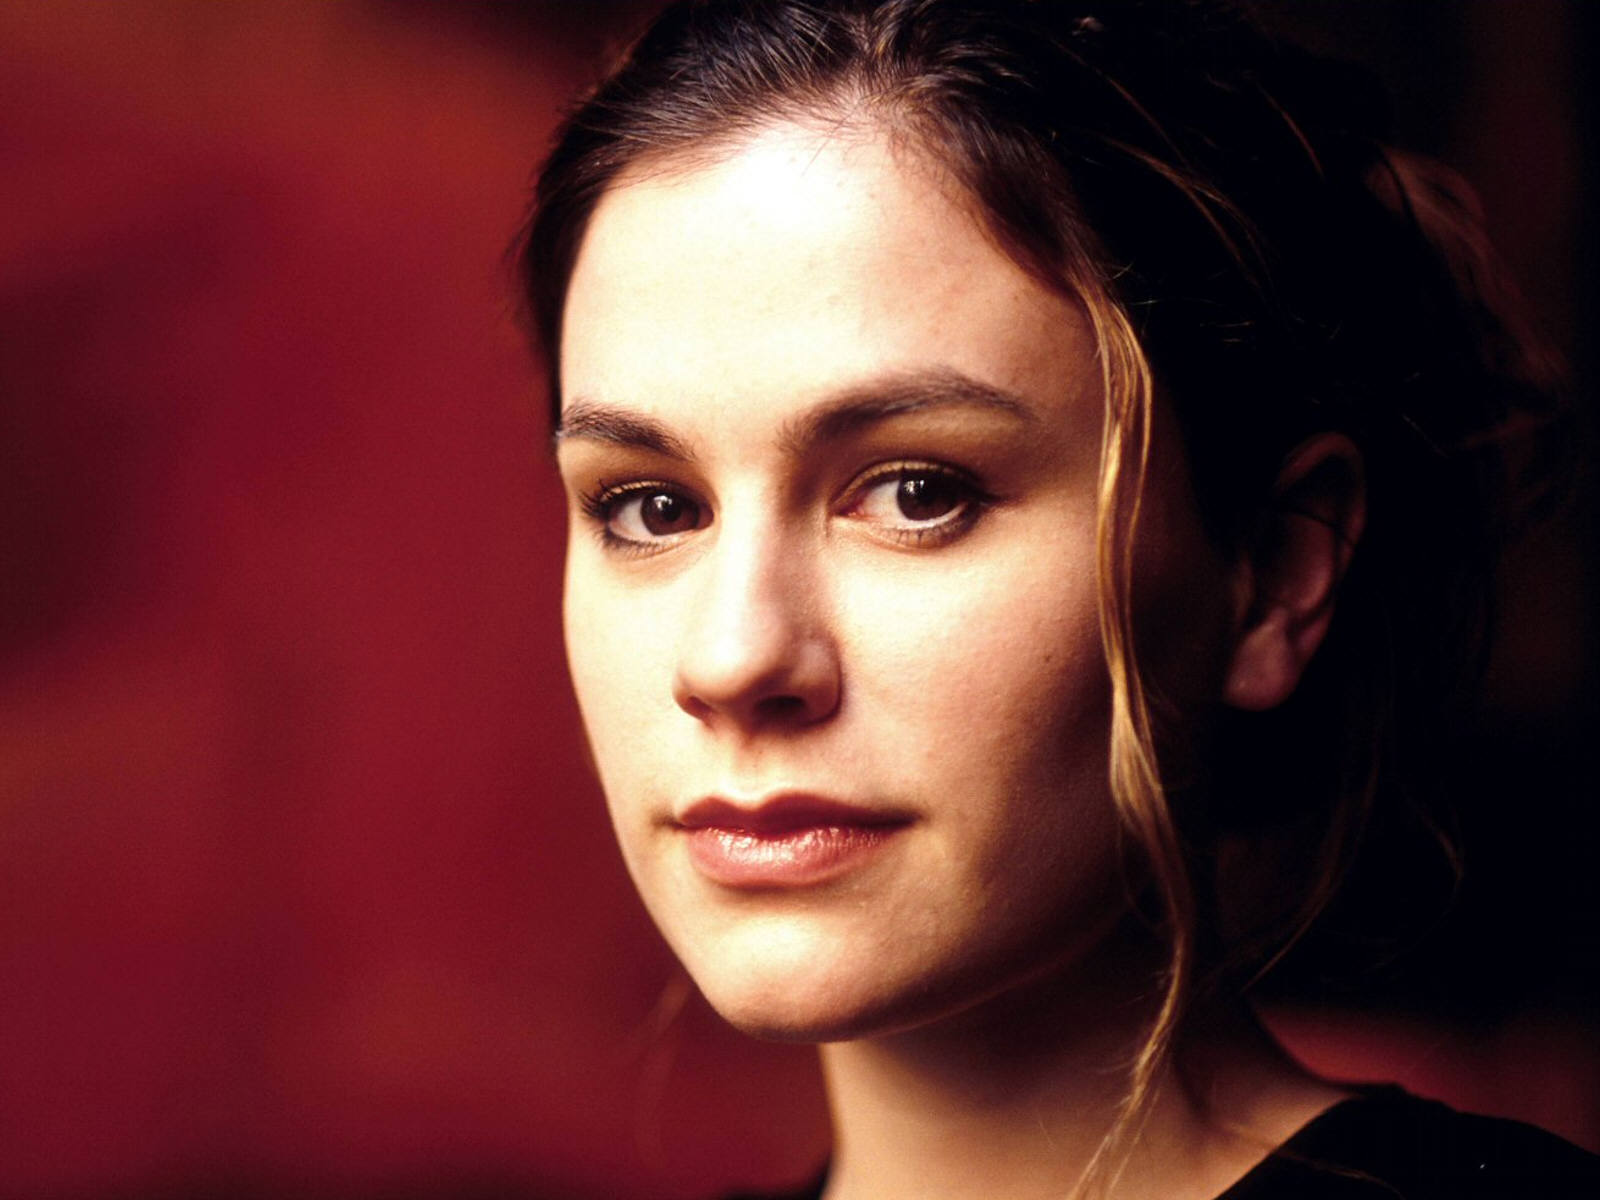 Download full size Anna Paquin wallpaper / Celebrities Female / 1600x1200